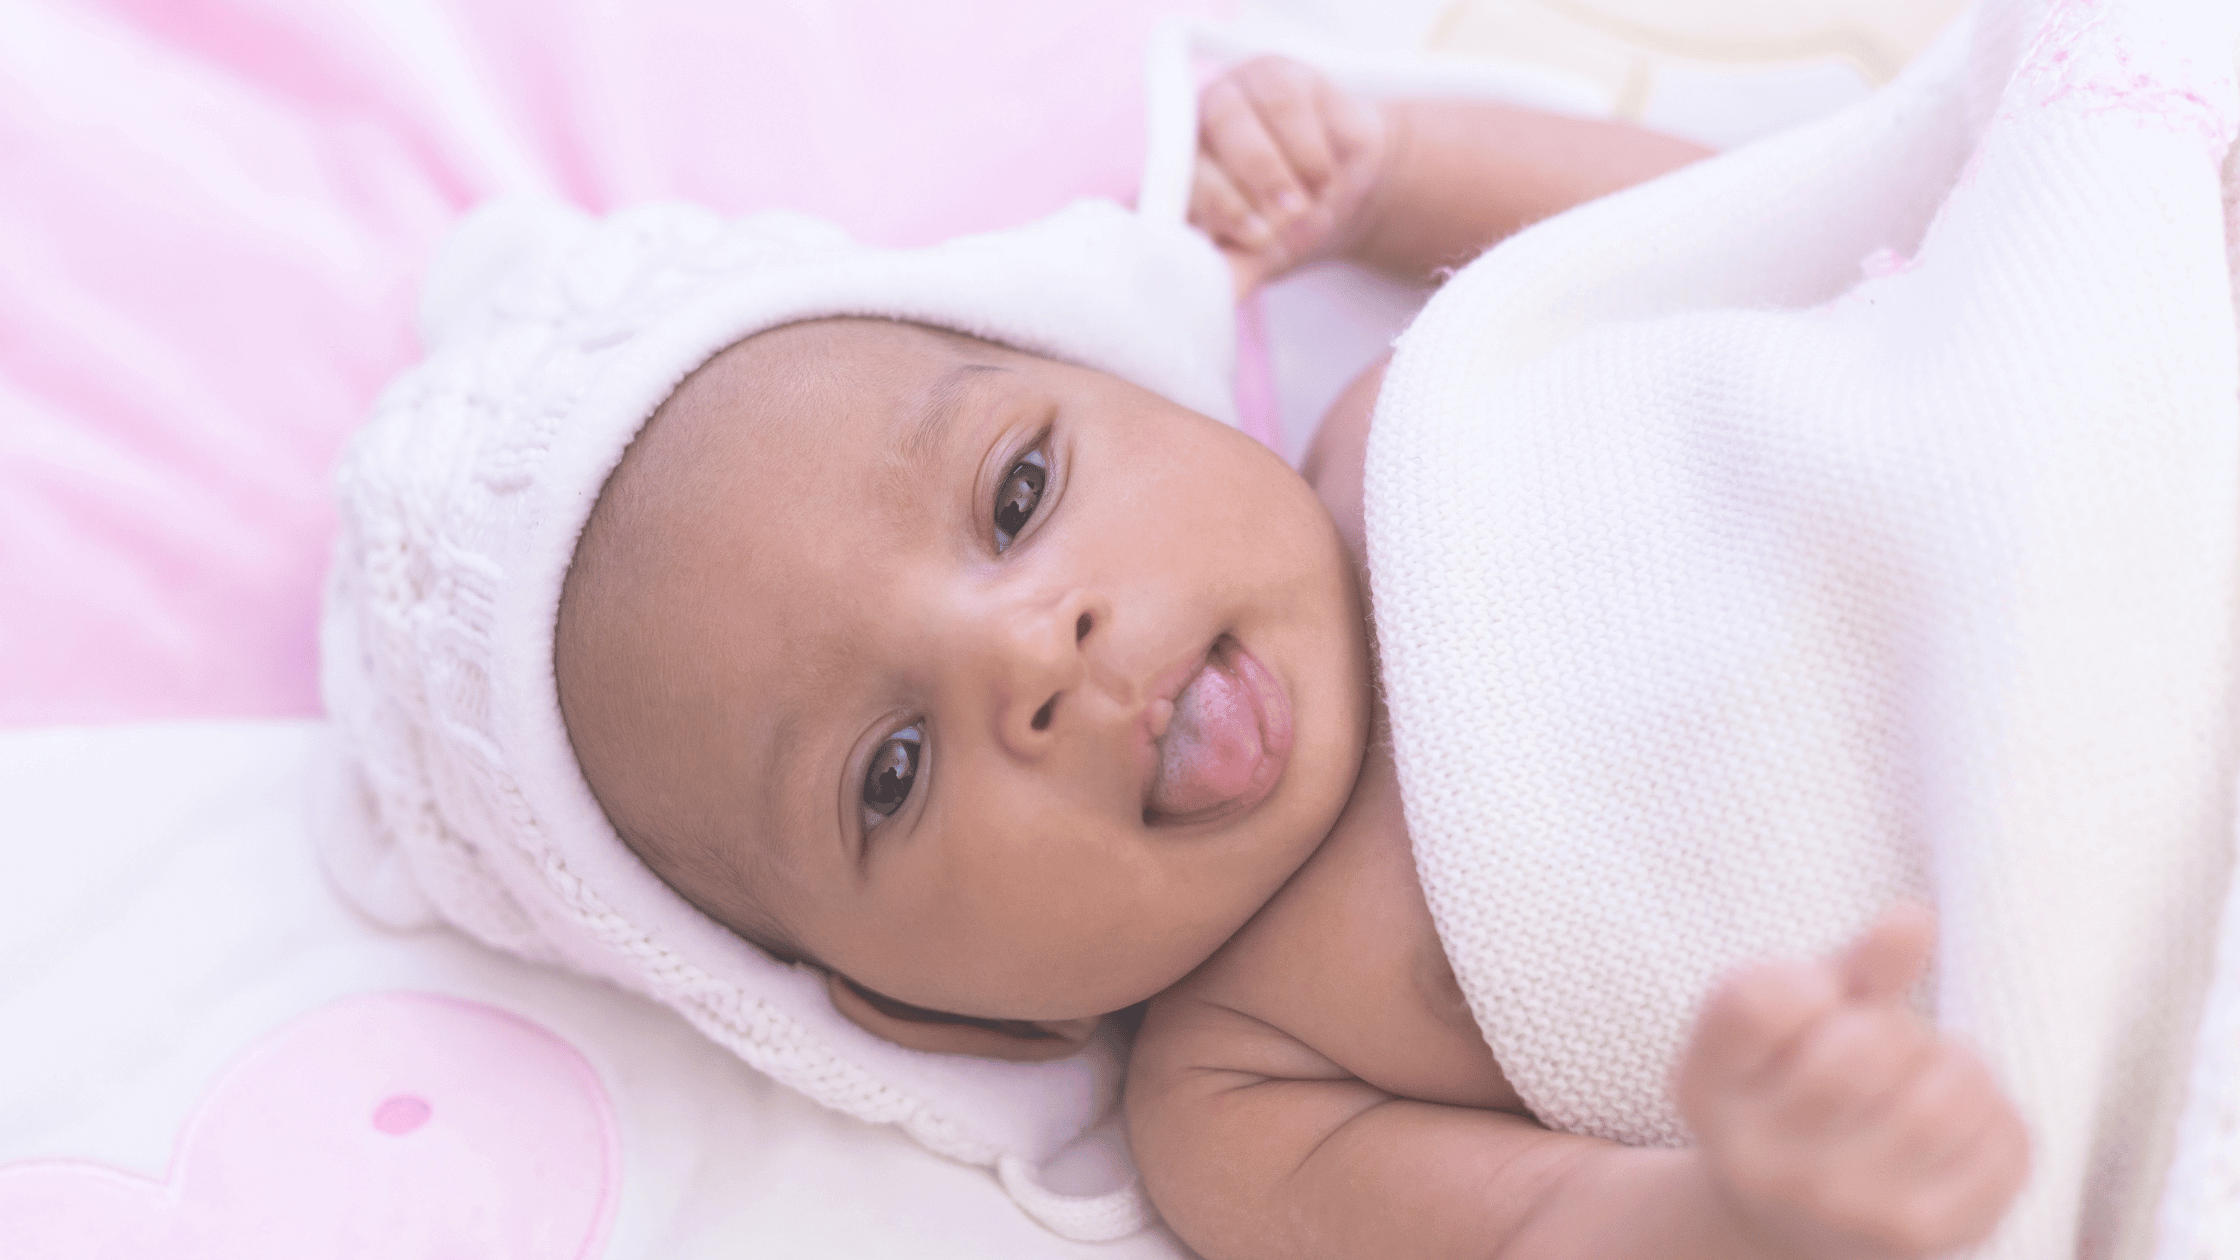 Infant with tongue sticking out